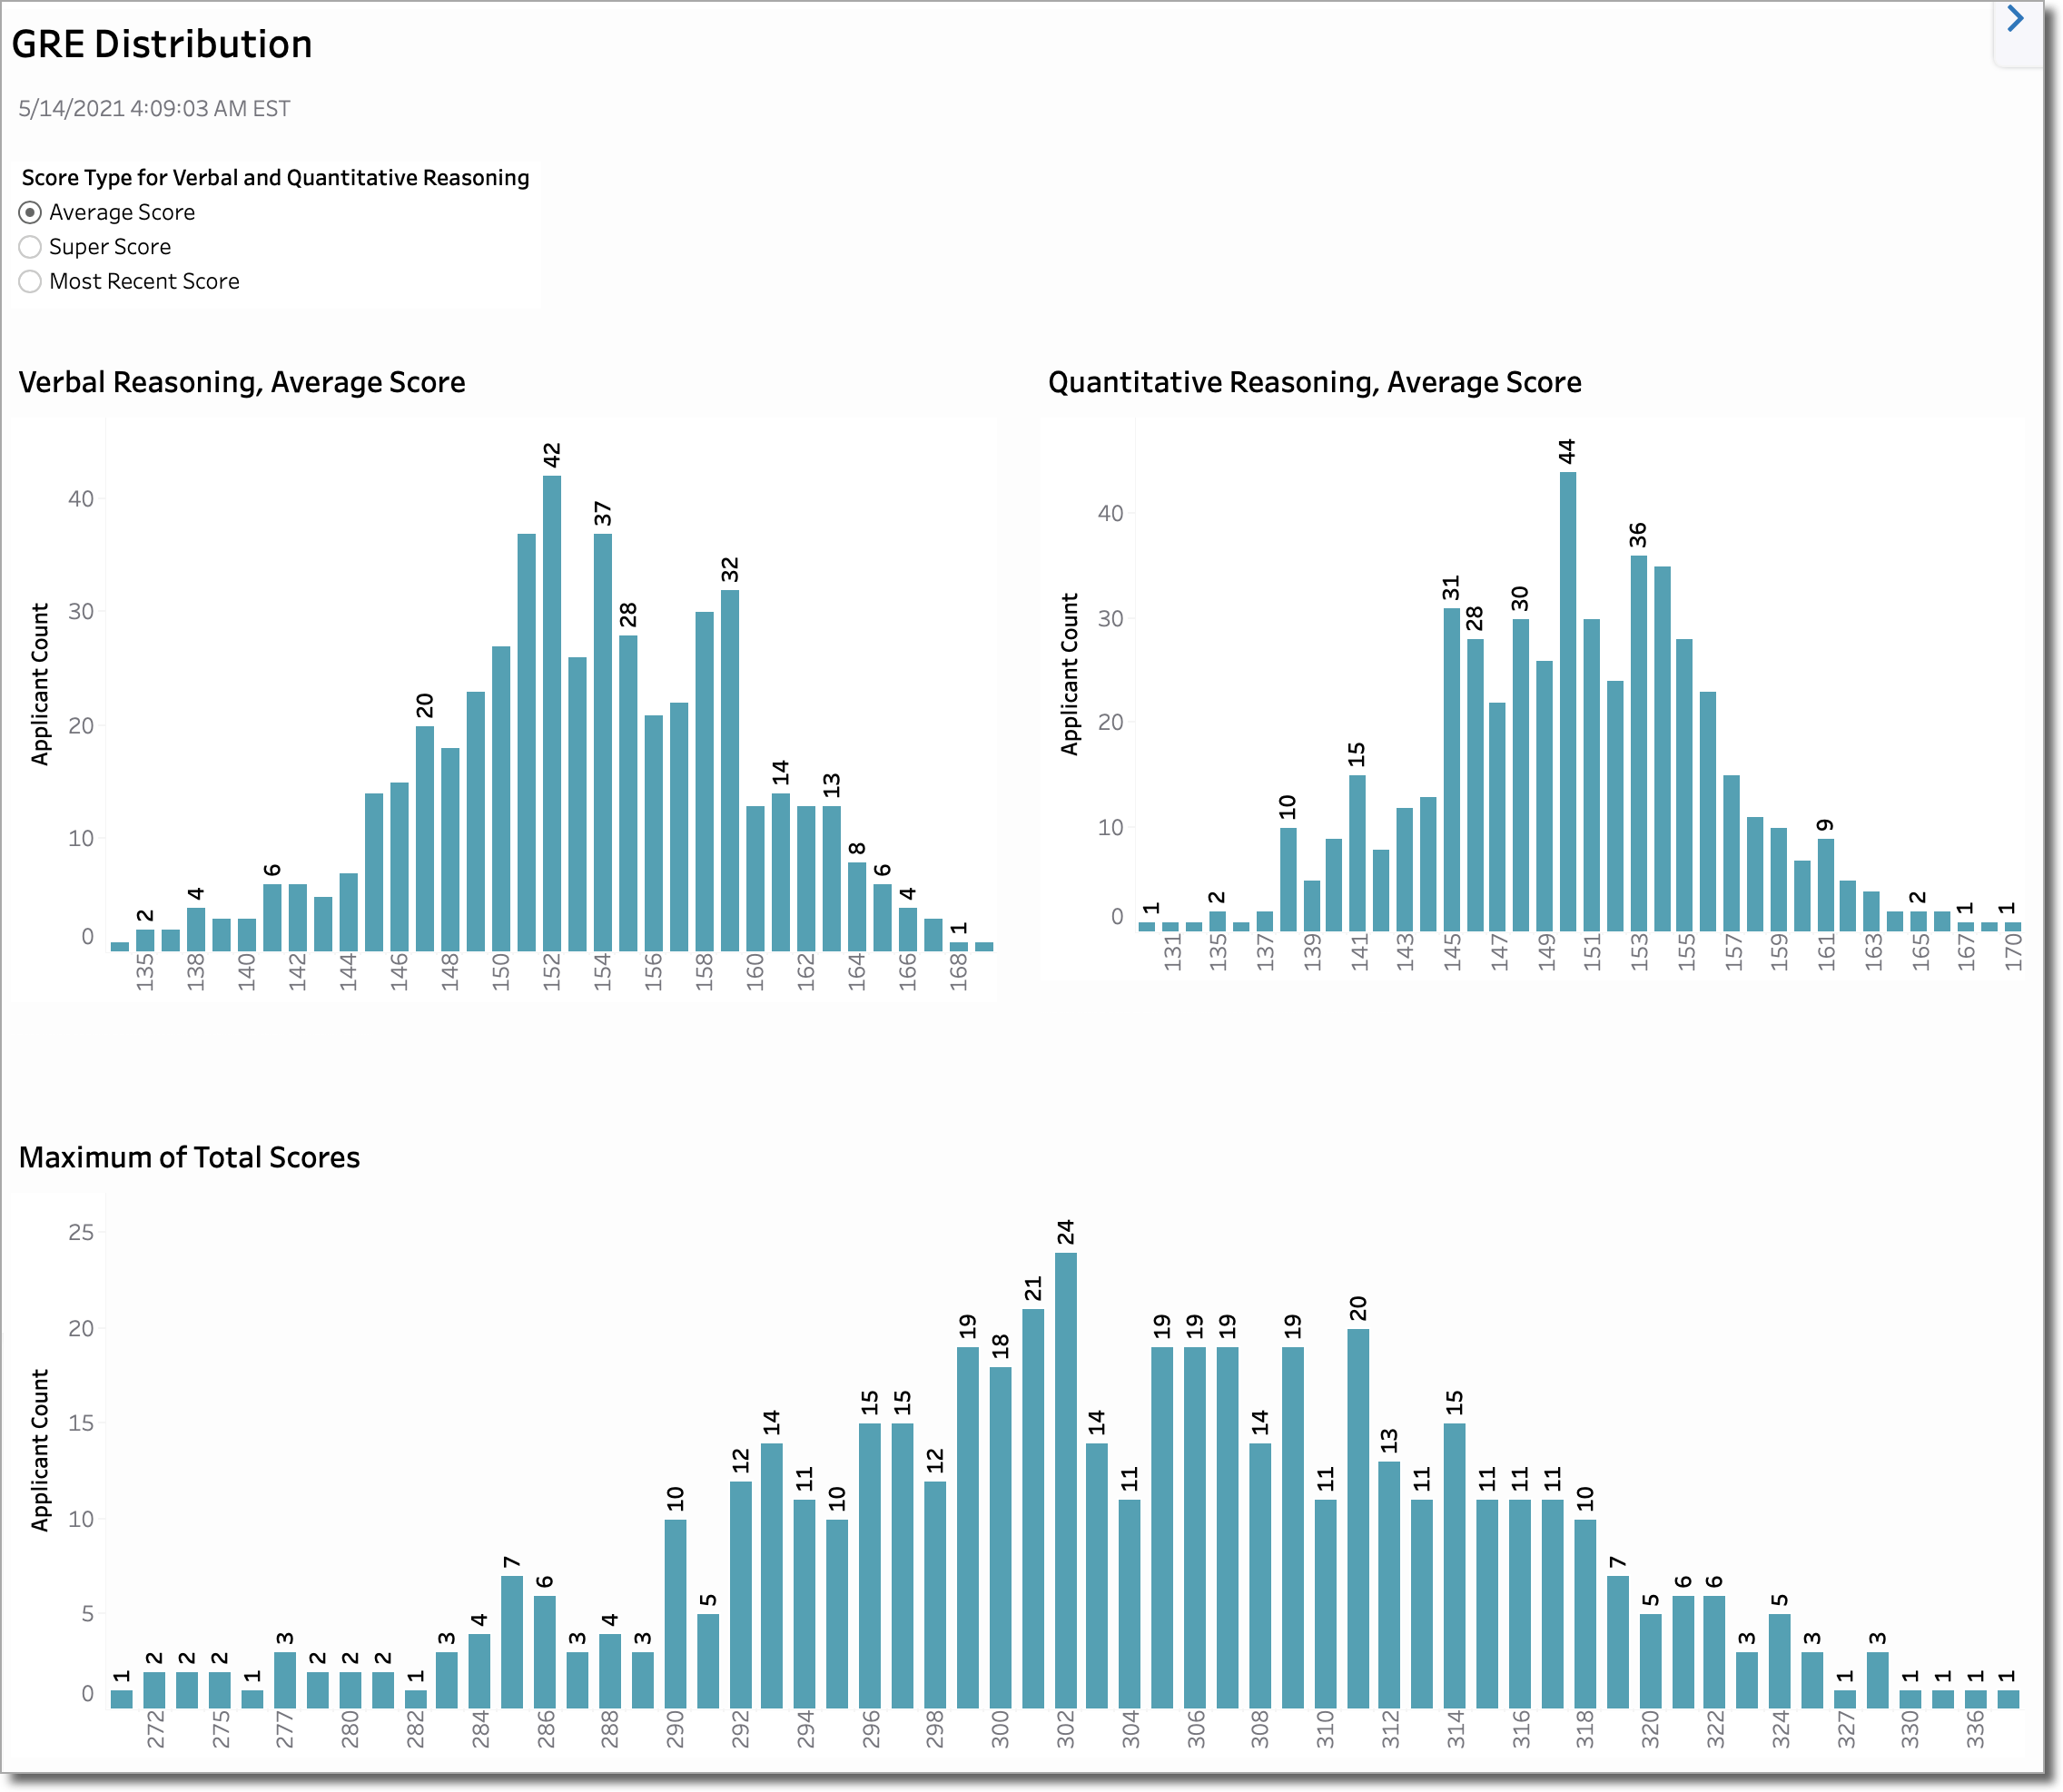 Example of a GRE Distribution dashboard with various bar charts